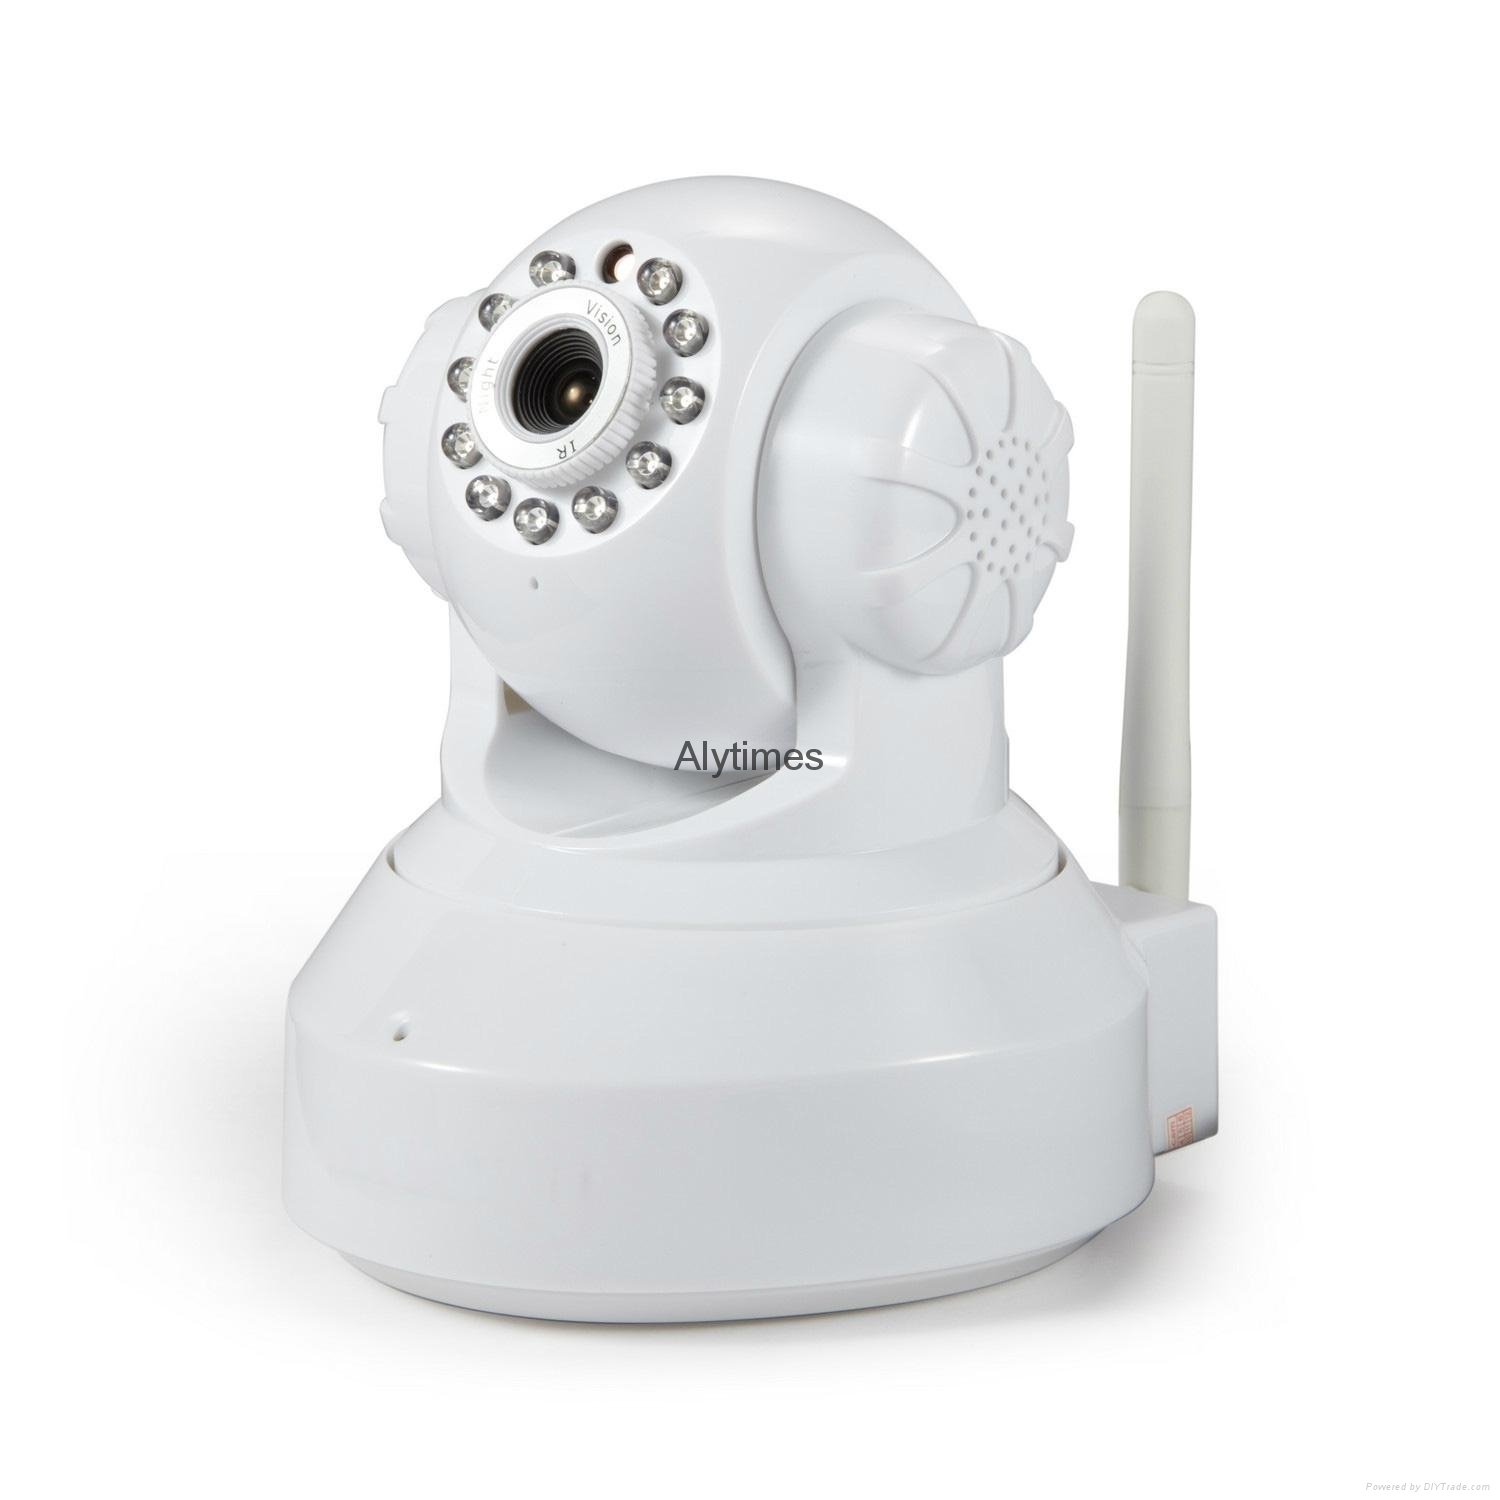 Alytimes Aly002 HD indoor pt wifi network sd card 720p cute ip cam 2